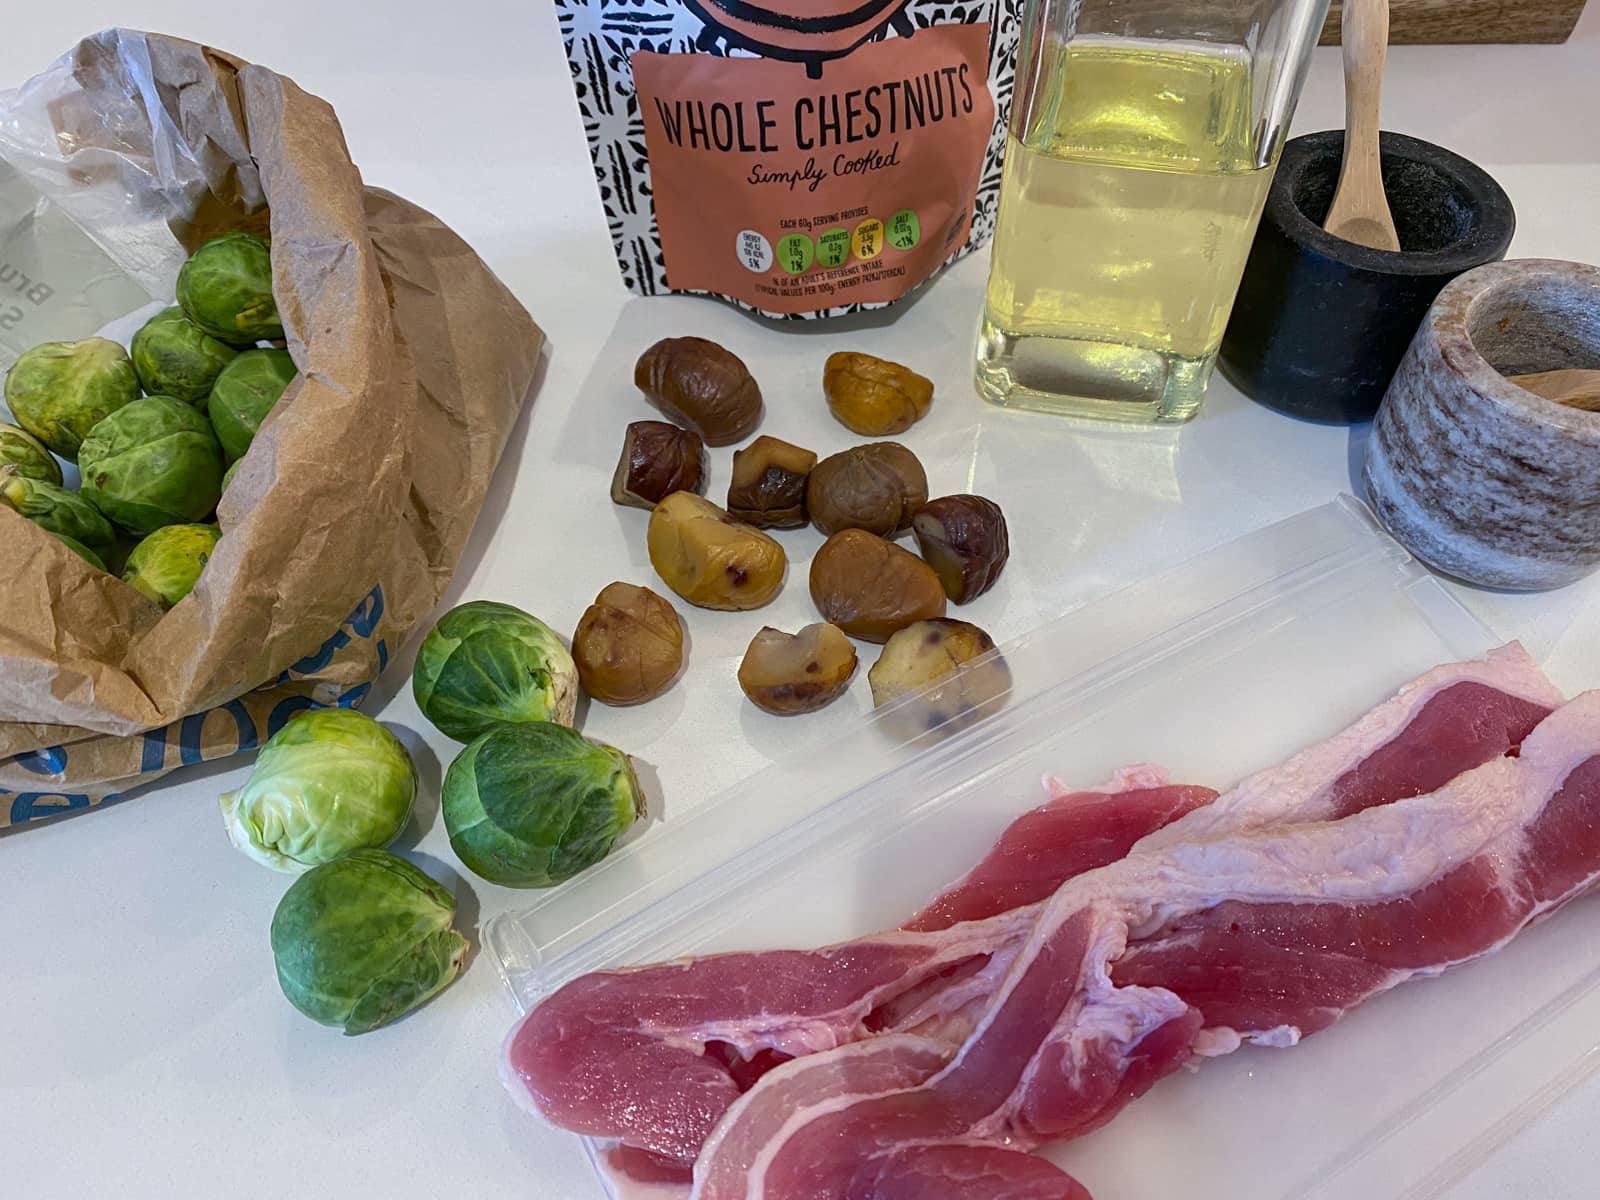 Ingredients on a white surface consisting of sprouts, chestnuts, bacon, oil, salt & pepper.